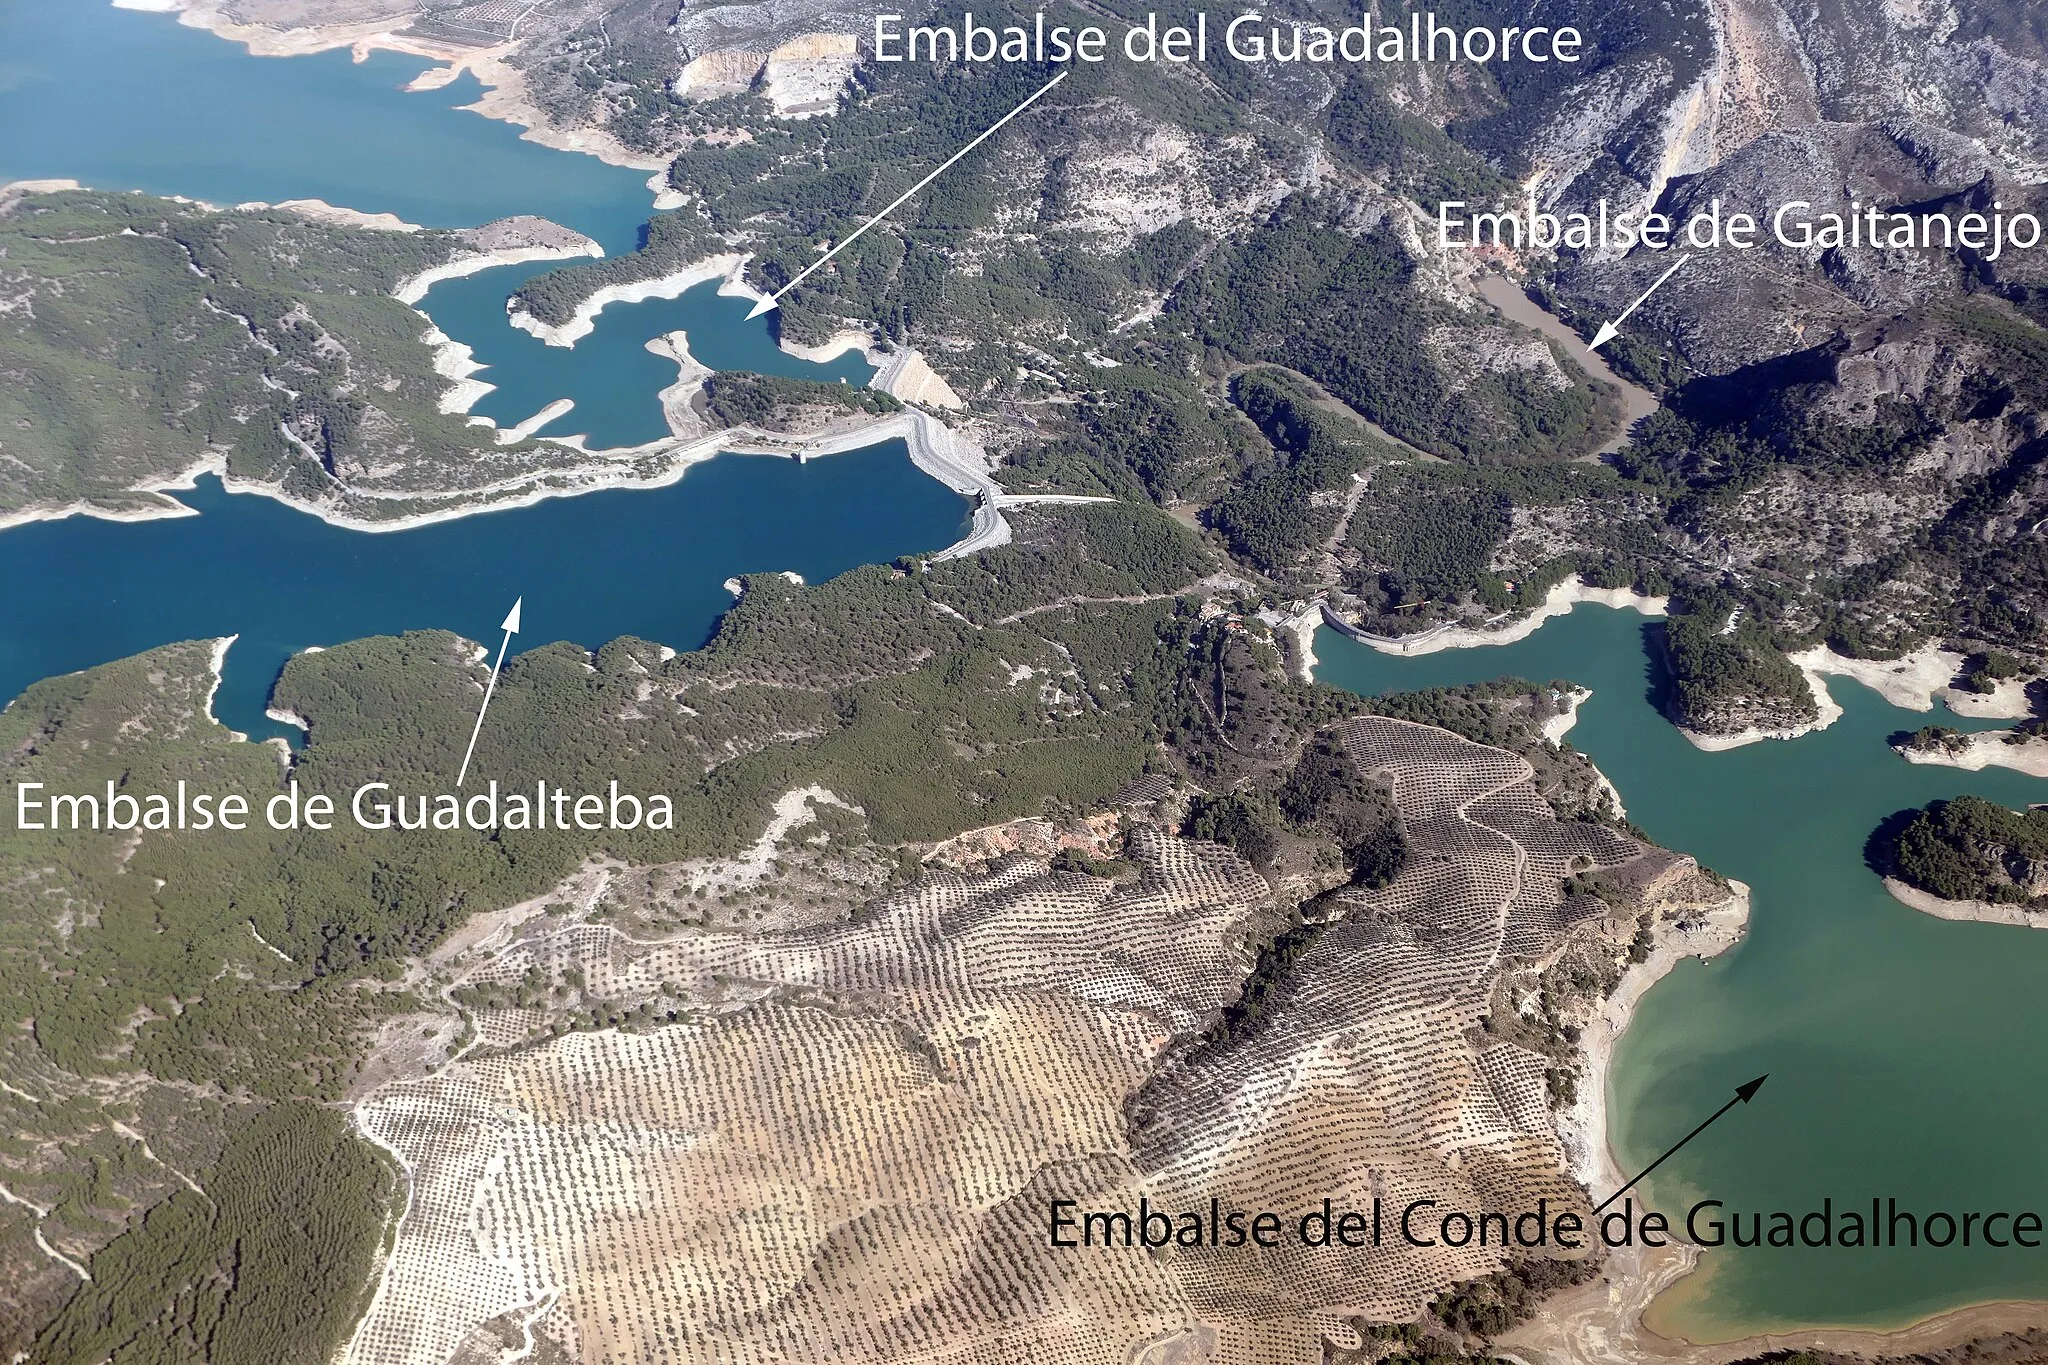 Photo showing: An aerial view showing part of four reservoirs in the south of Spain. They are Guadalhorce, Guadalteba, Gaitanejo and Conde de Guadalhorce.